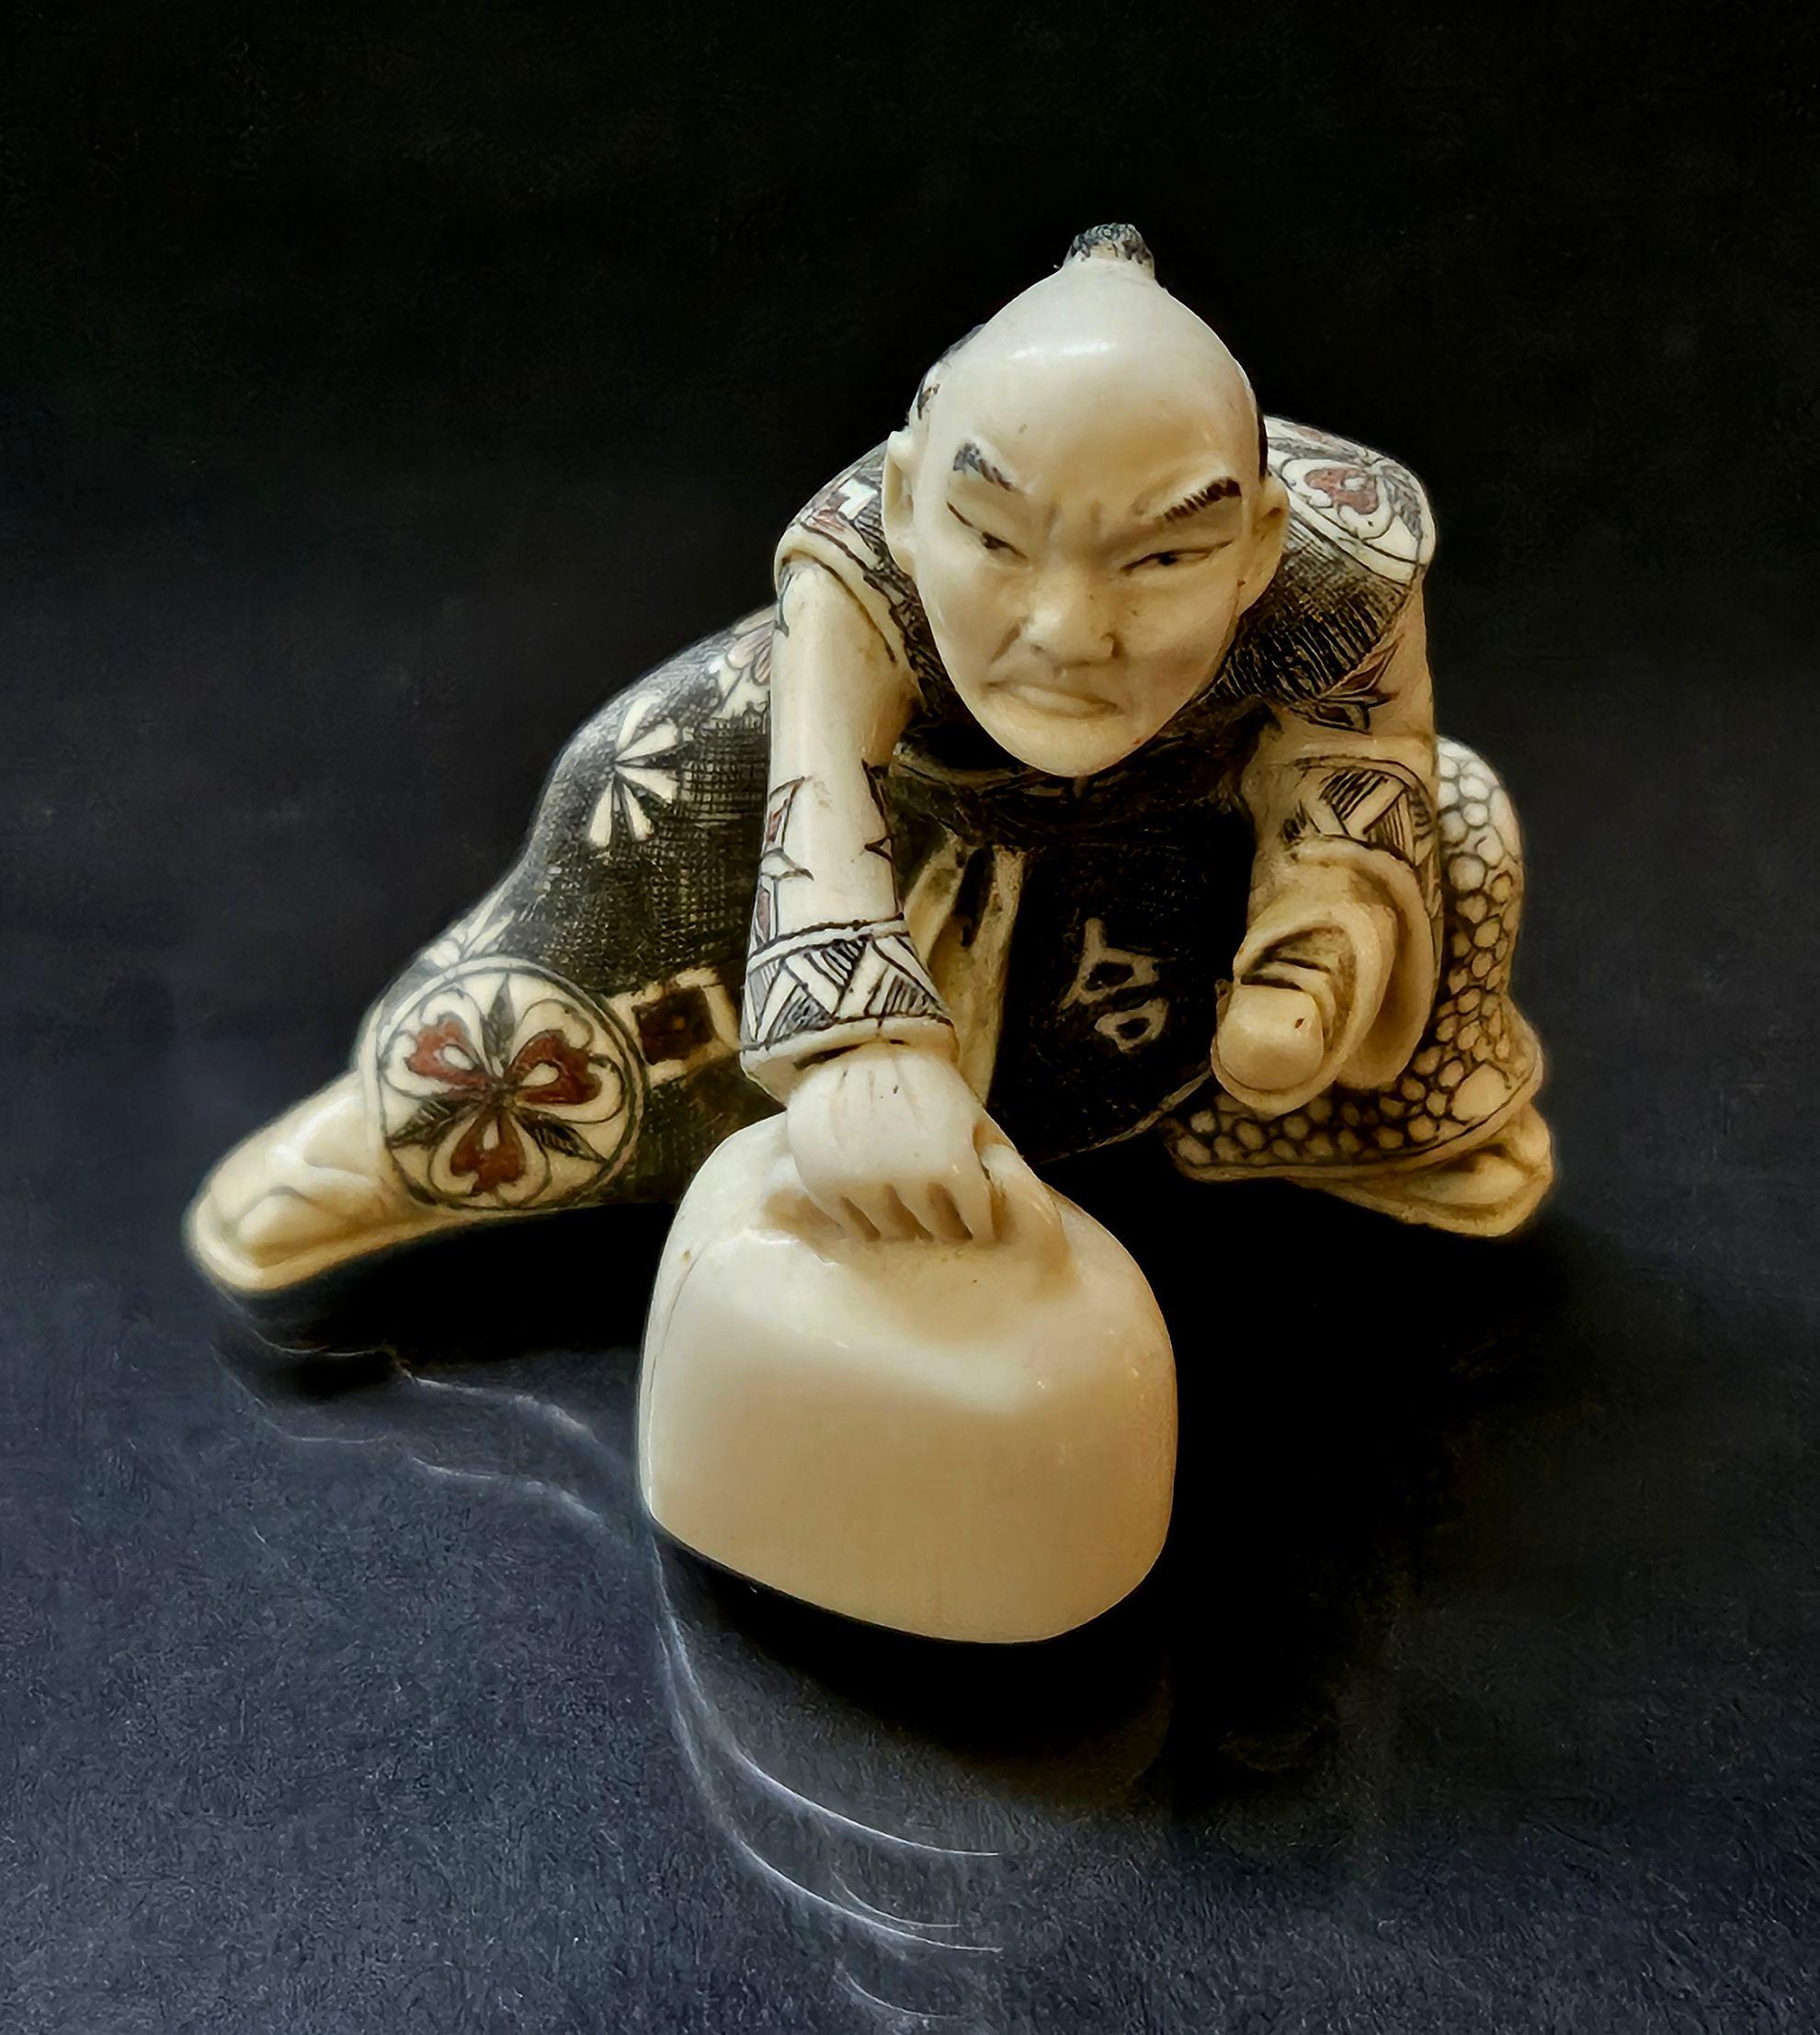 Netsuke Japanese Hand-Carved Polychrome Decorated Figure, Signed on the bottom from the Meiji period. 

A truly hand-carved ivory figure, A man is lifting a weight. It looks like he is challenging himself for his strength, which shows a museum